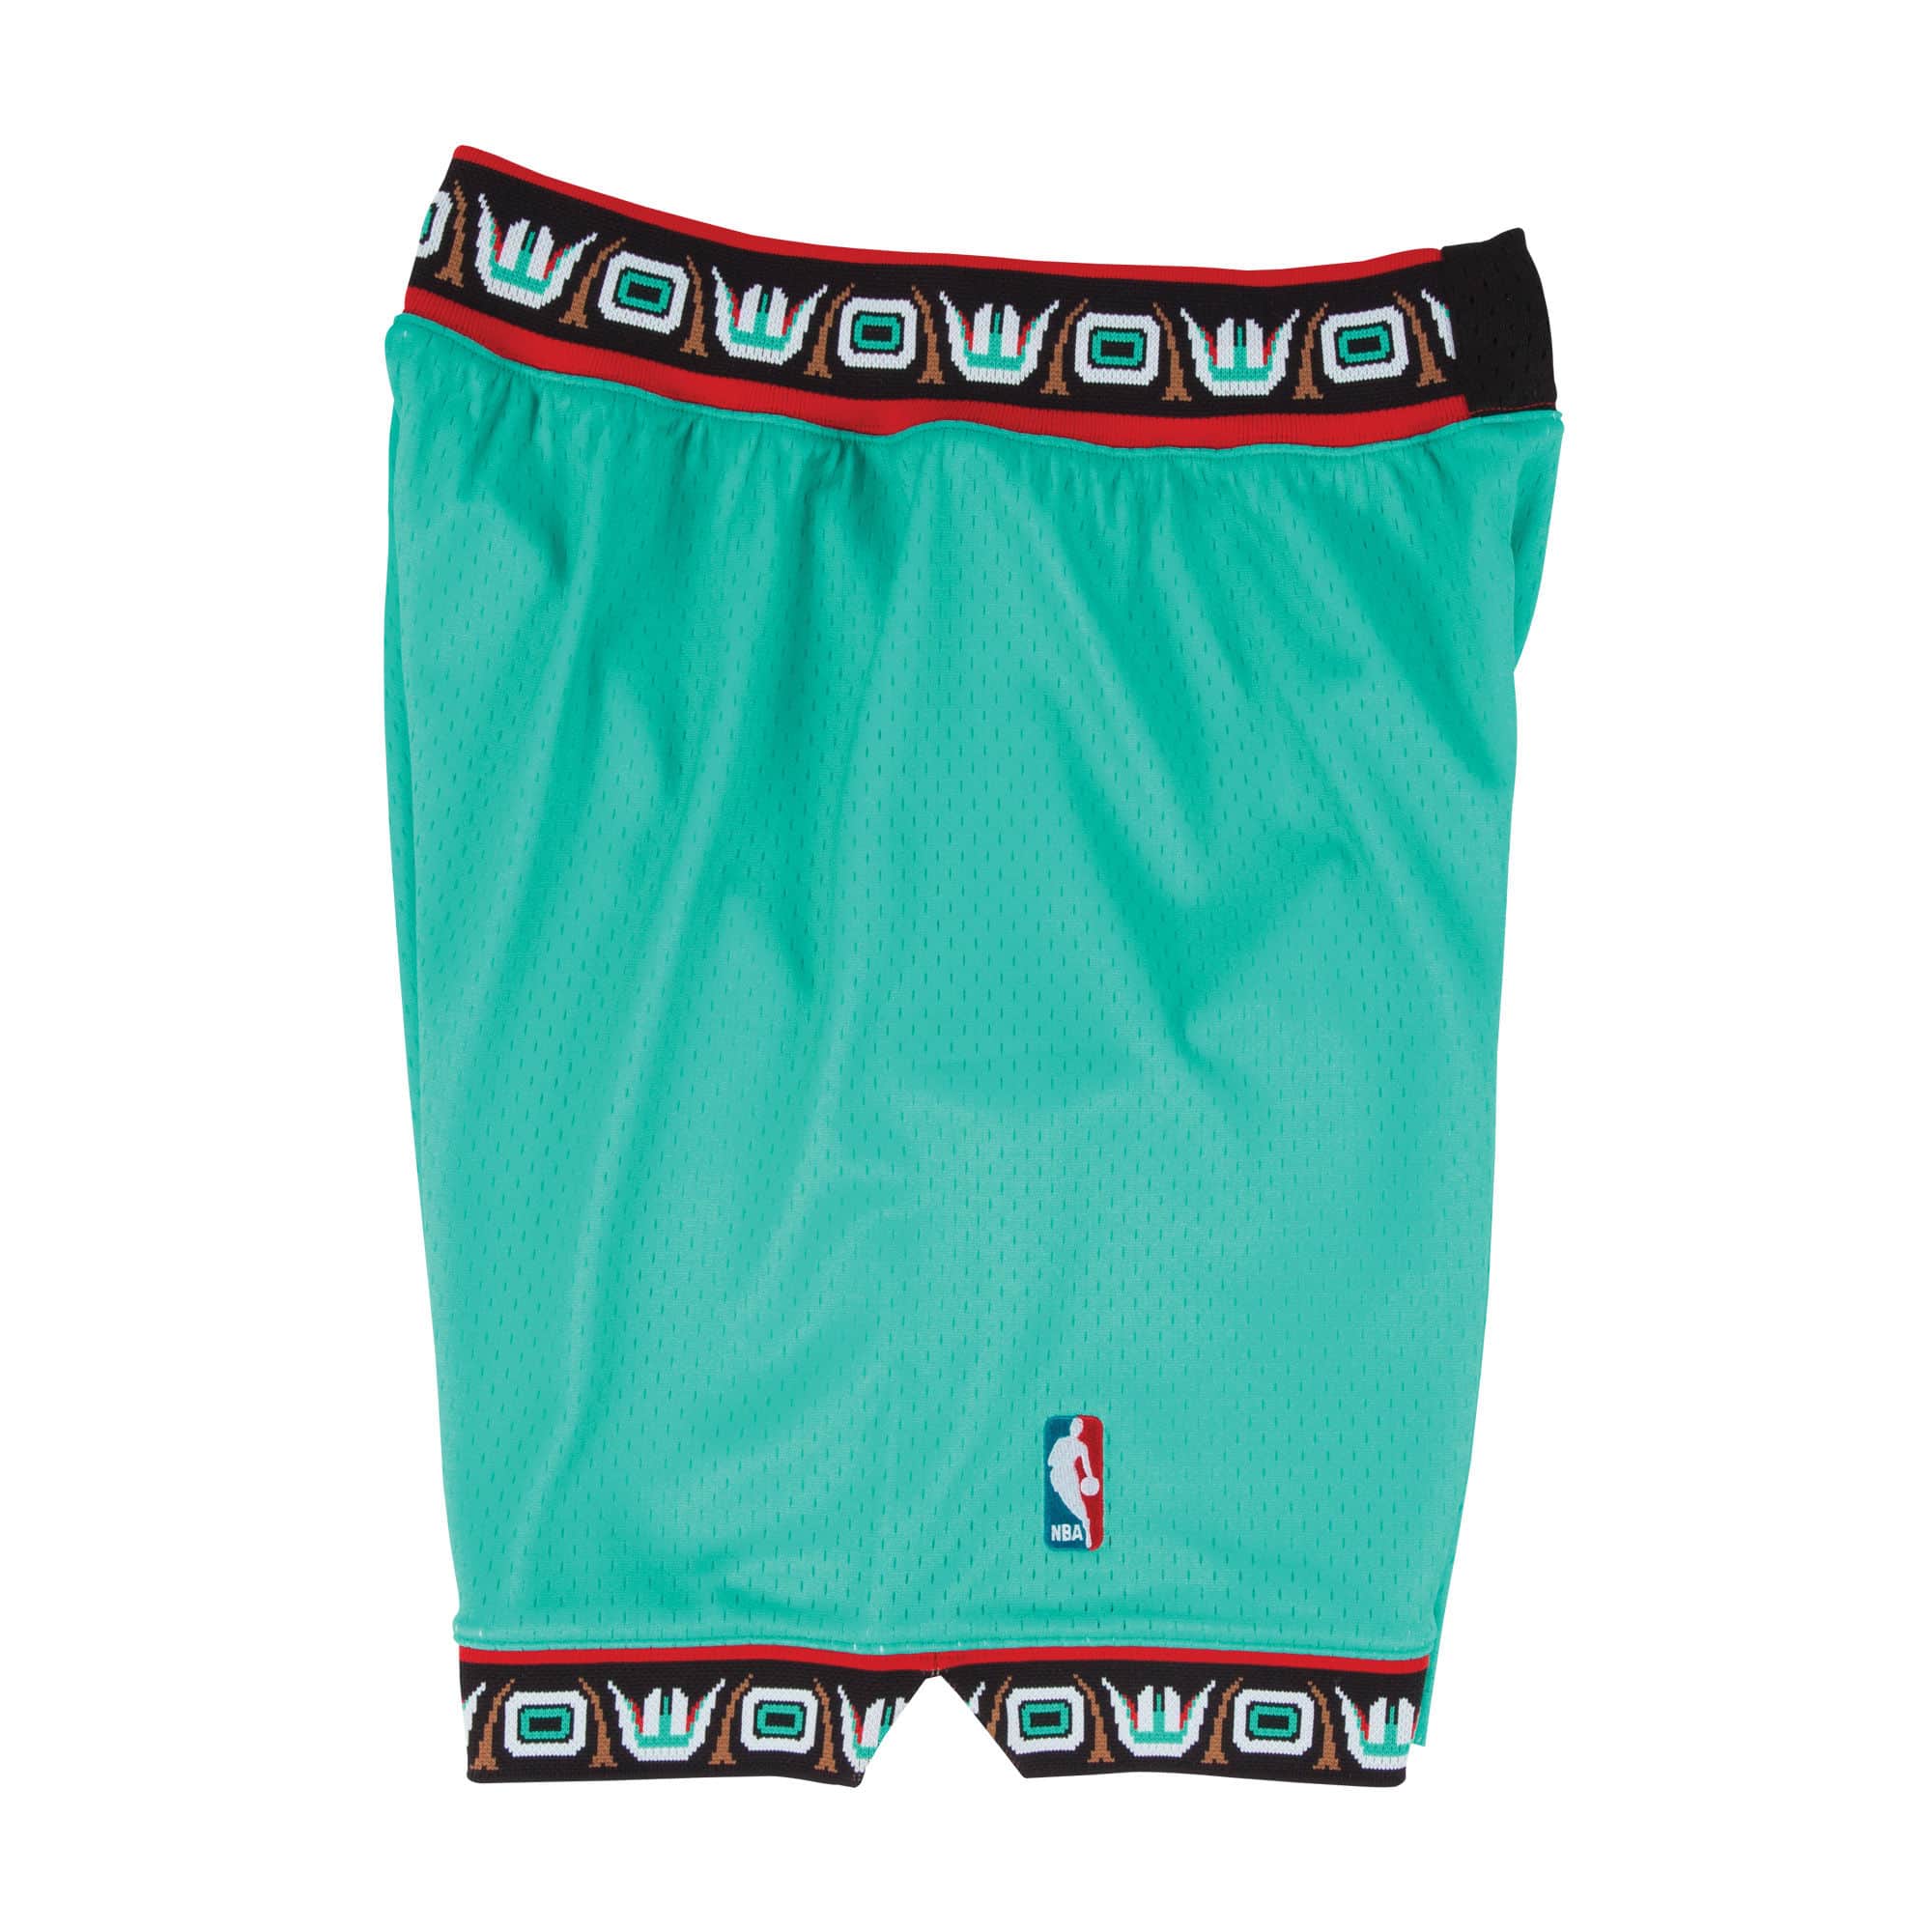 Men's Mitchell & Ness Turquoise Vancouver Grizzlies 1995/96 Hardwood Classics Authentic Shorts Size: Large